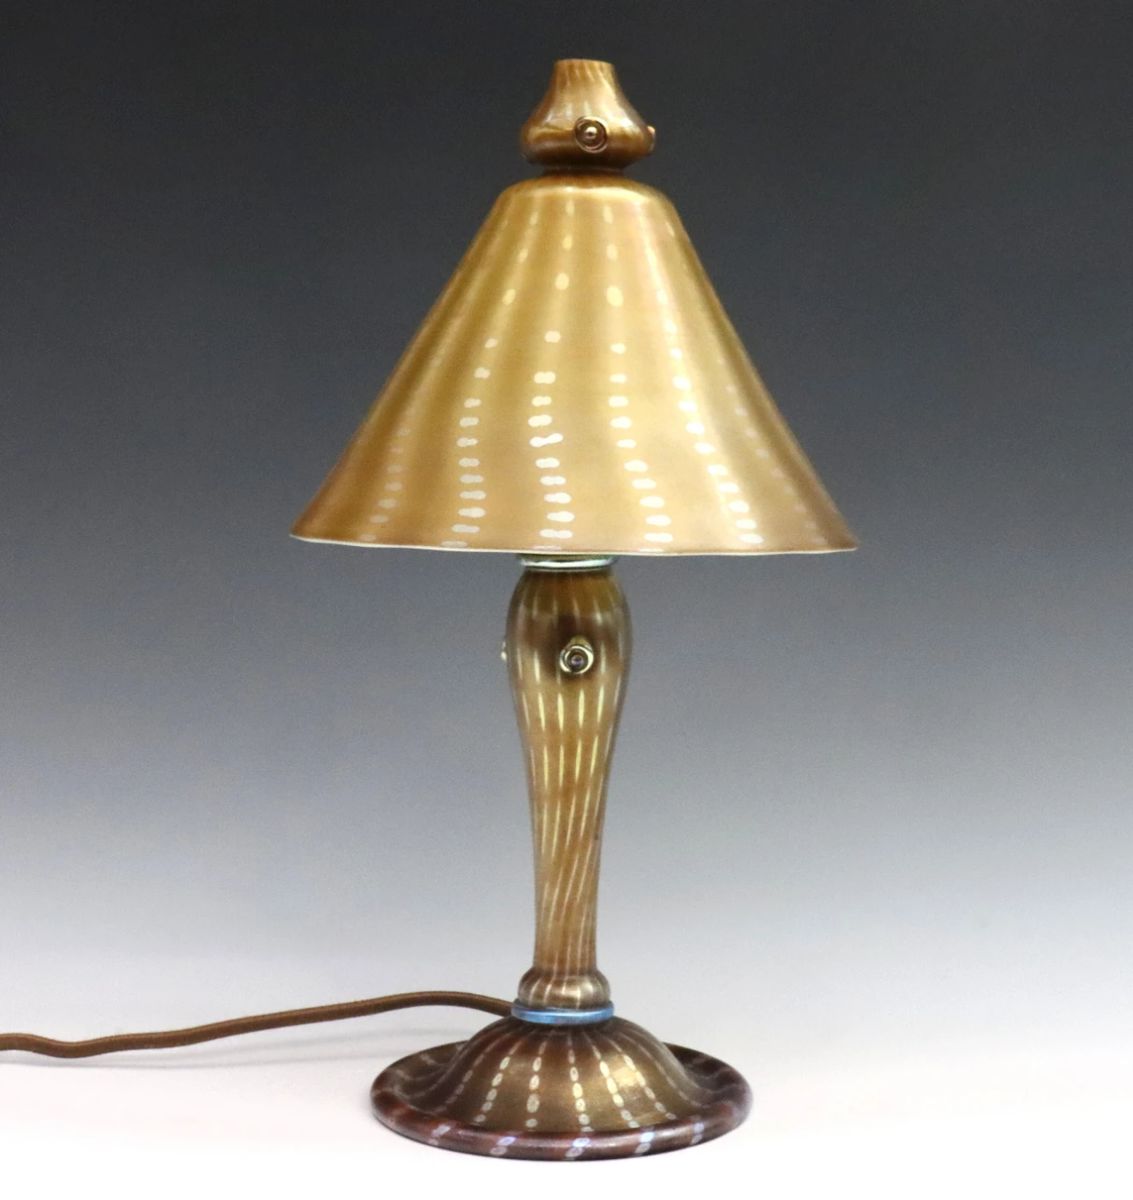 An early 20th century Tiffany Favrile Glass boudoir lamp.  Conical glass shade and baluster base with Gold/Amber Arabian pattern decoration having a repetitive dot design with applied circular prunts.  Shade signed "LCT" and base "L.C. Tiffany".  Slight surface wear.  7" diameter x 13 1/2" high overall.  
